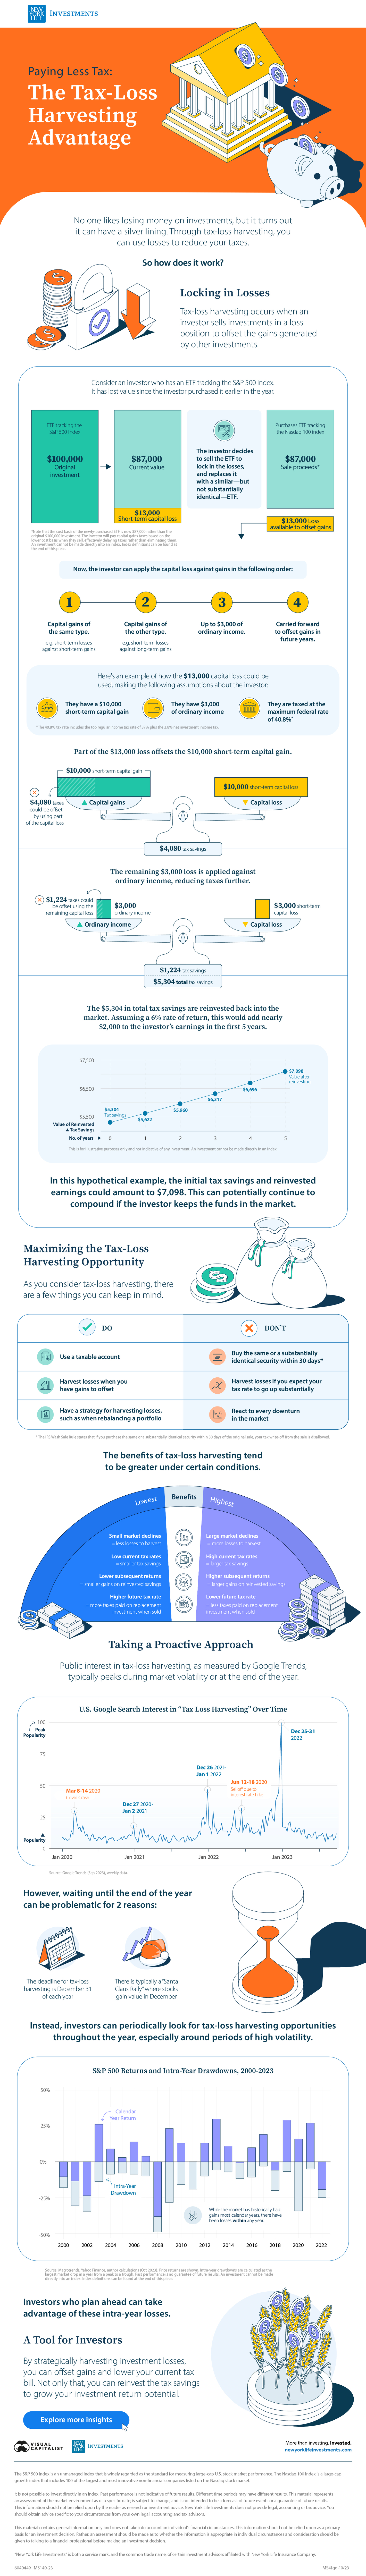 Long-form infographic detailing what tax-loss harvesting is, how to maximize the opportunity, and why investors should be proactive rather than waiting until the end of the year.